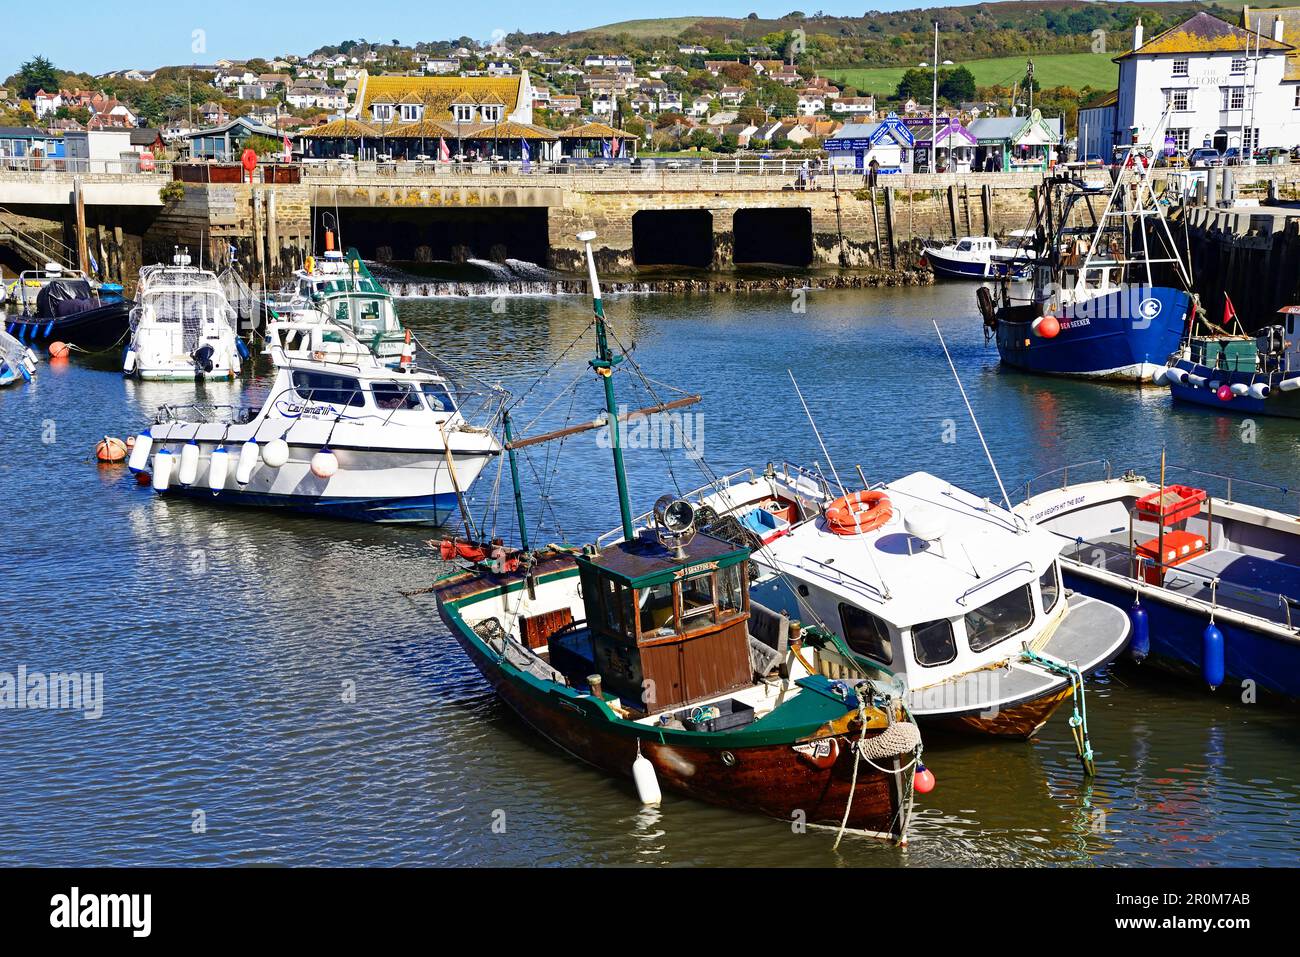 View of traditional fishing boats moored in the harbour at low tide with the town and countryside to the rear, West Bay, Dorset, UK. Stock Photo